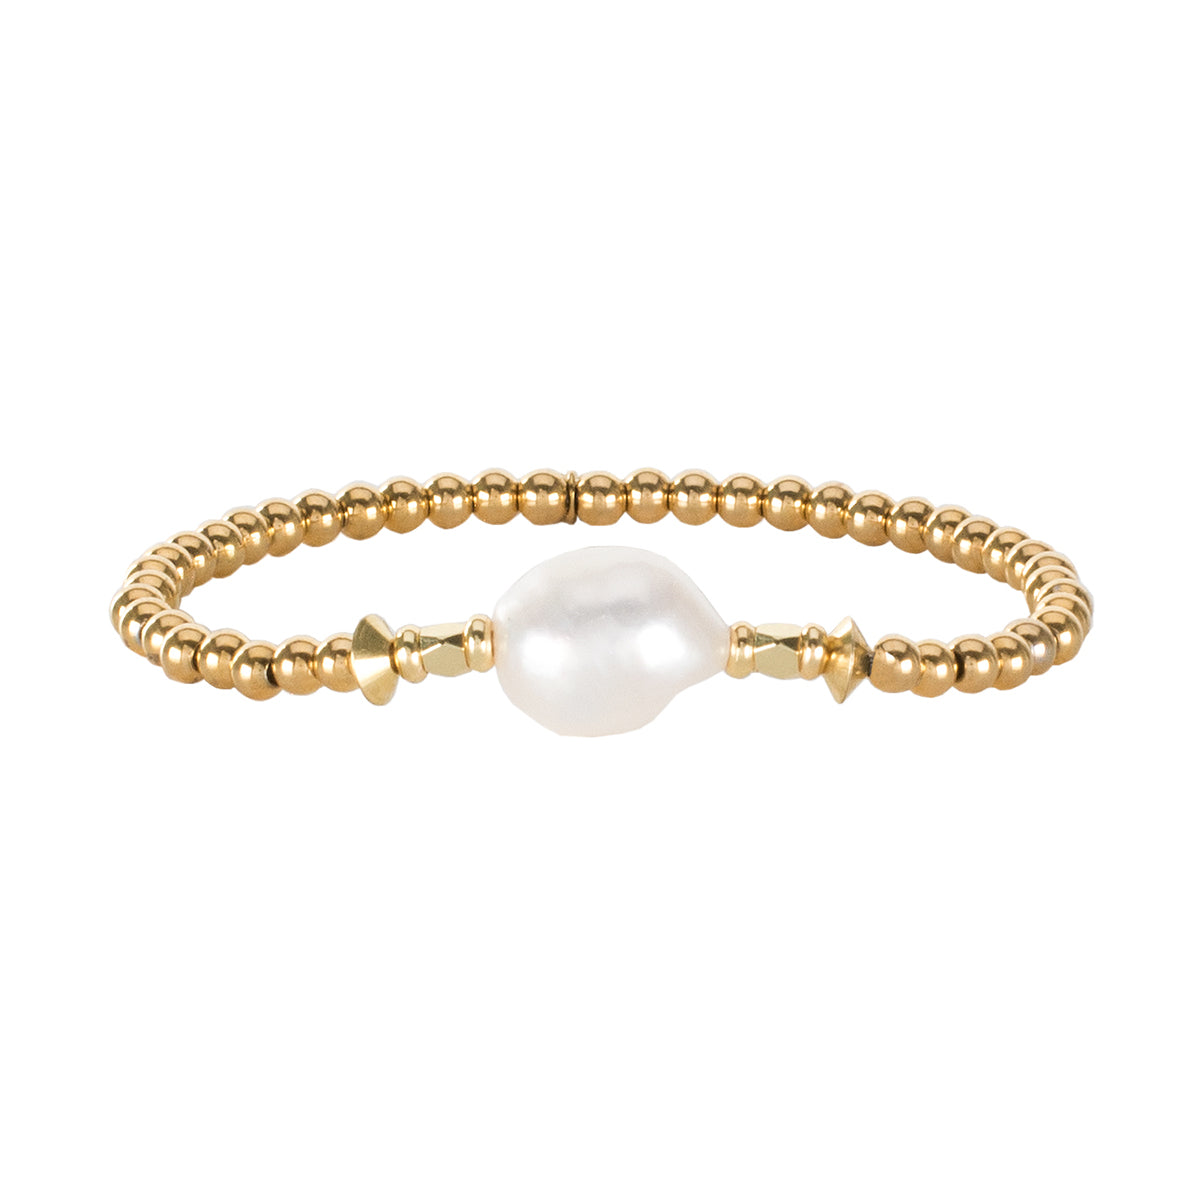 Abigail Gold Beaded Bracelet with Baroque Pearl